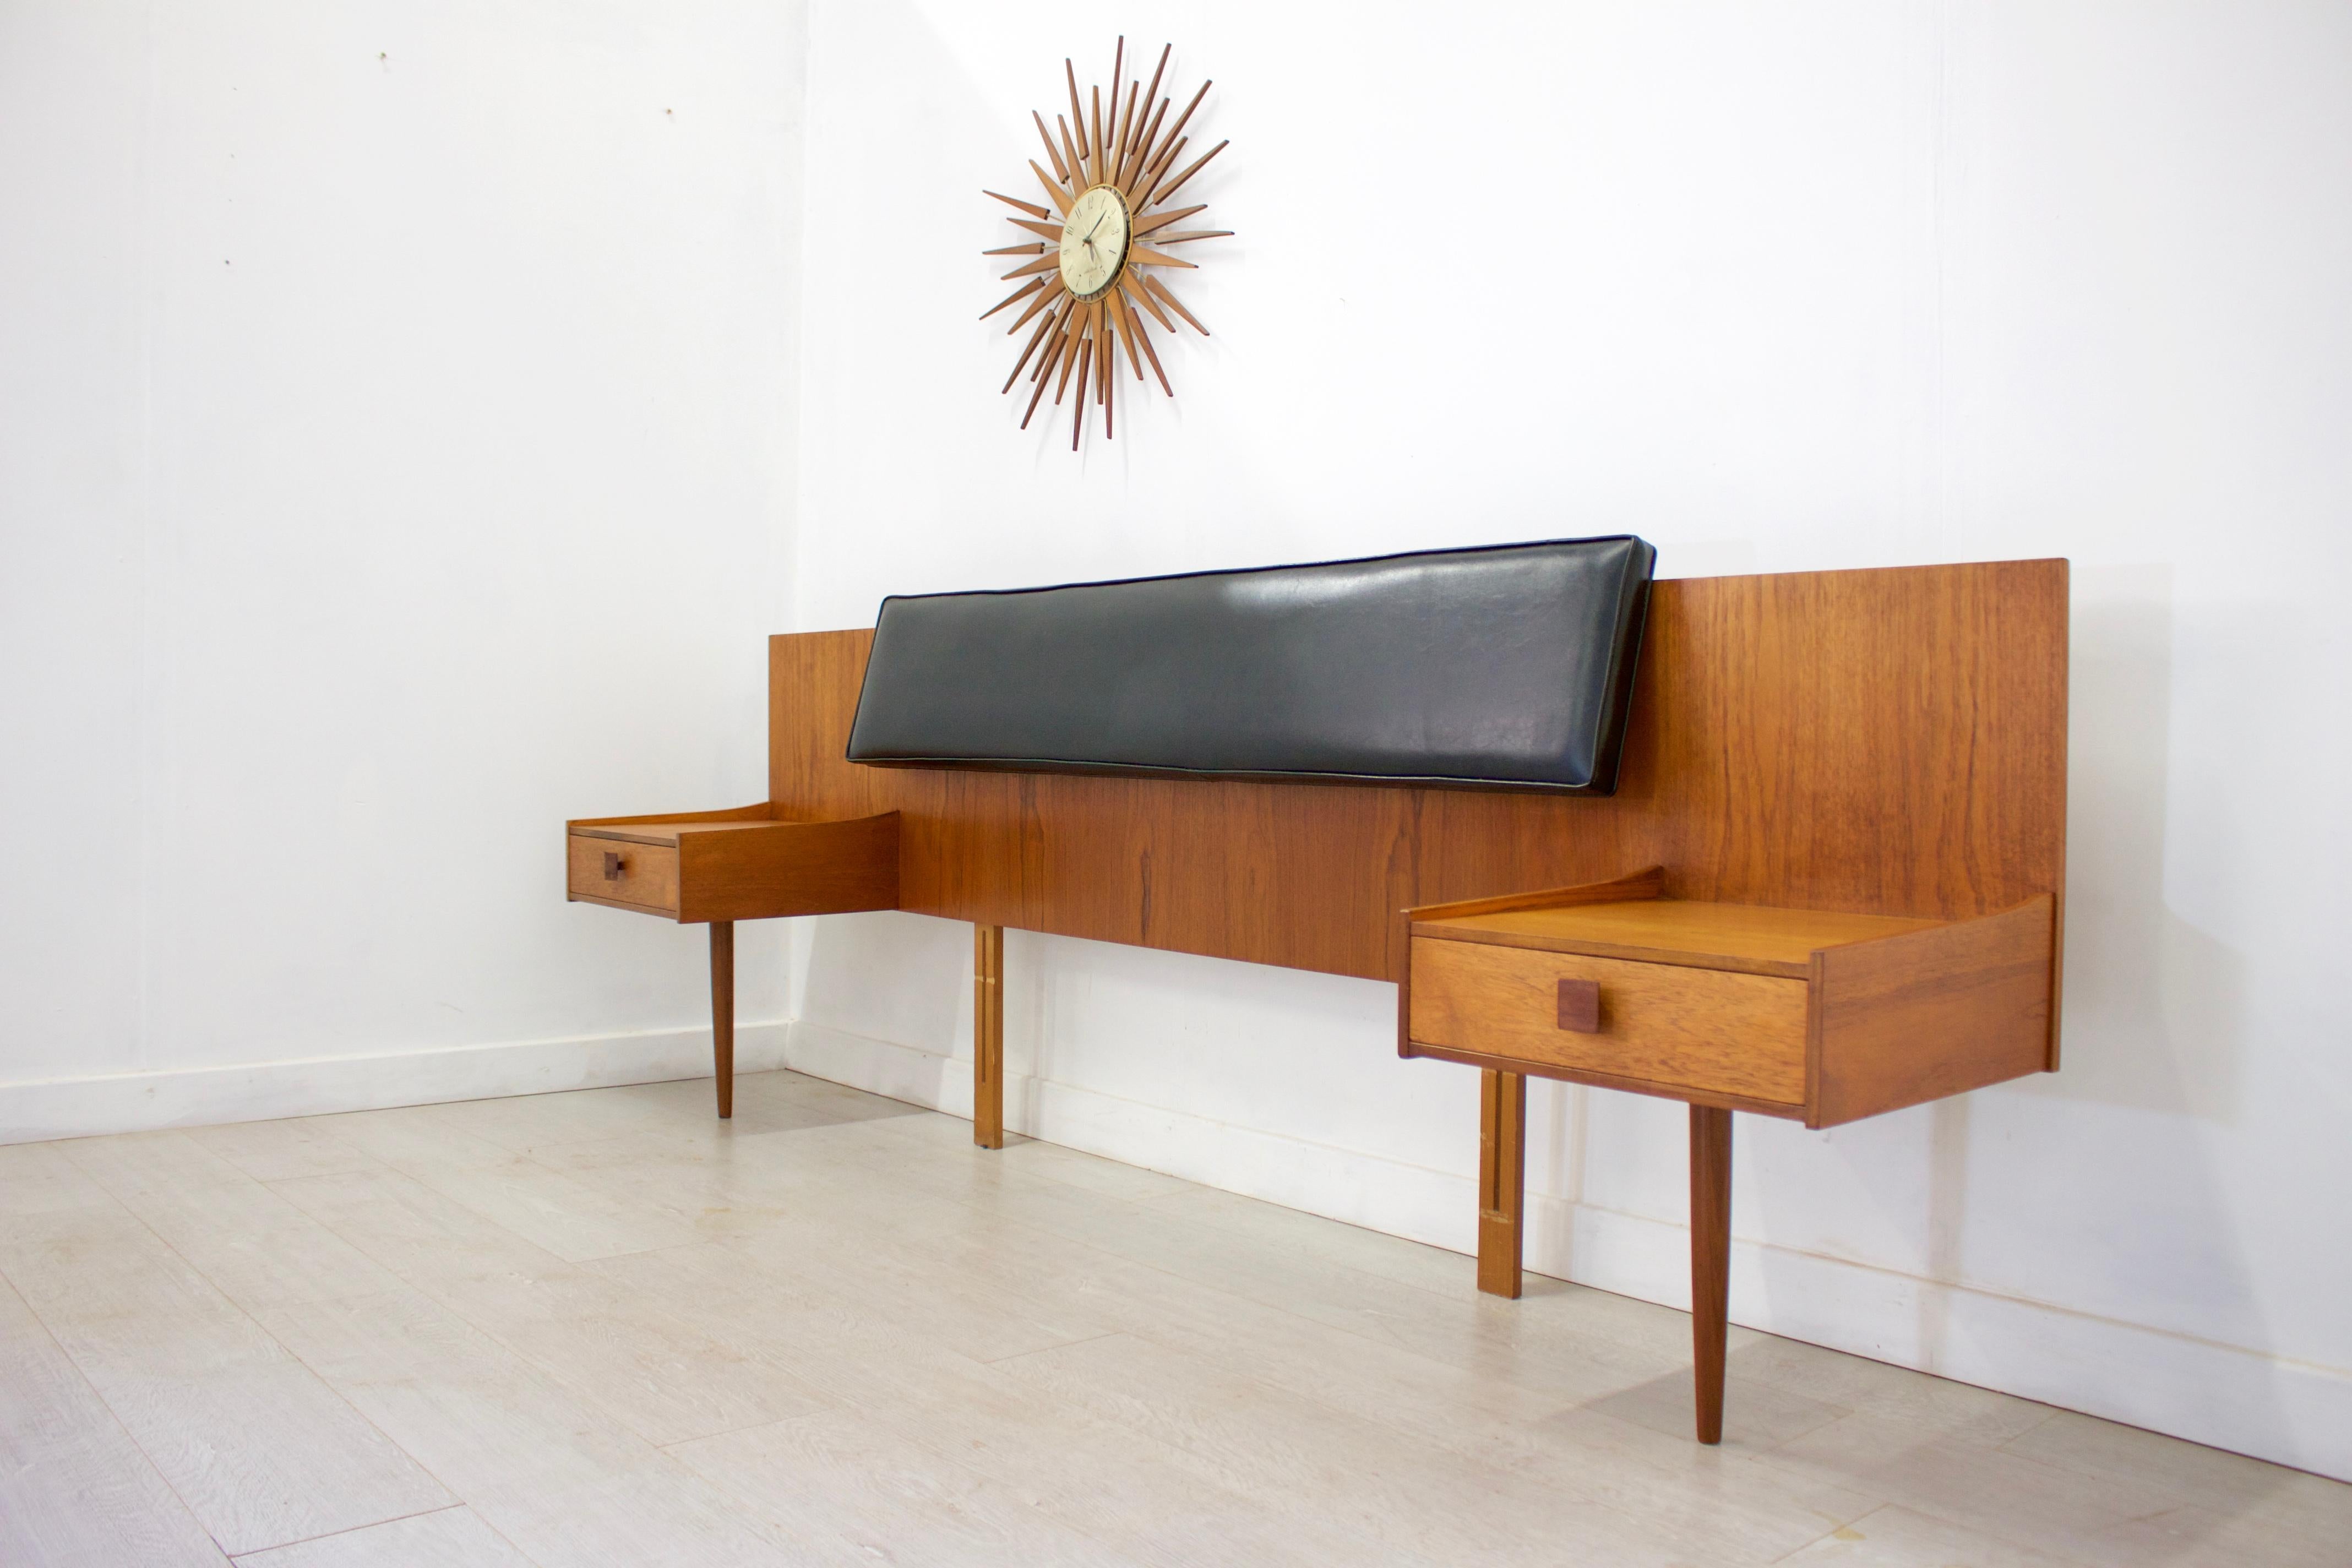 Midcentury G Plan Kofod-Larsen Danish headboard and bedside tables

This is a very stylish Danish teak headboard and bedside tables designed by Kofod-Larsen for G-Plan.
This is a rare piece, as they were significantly more expensive than other